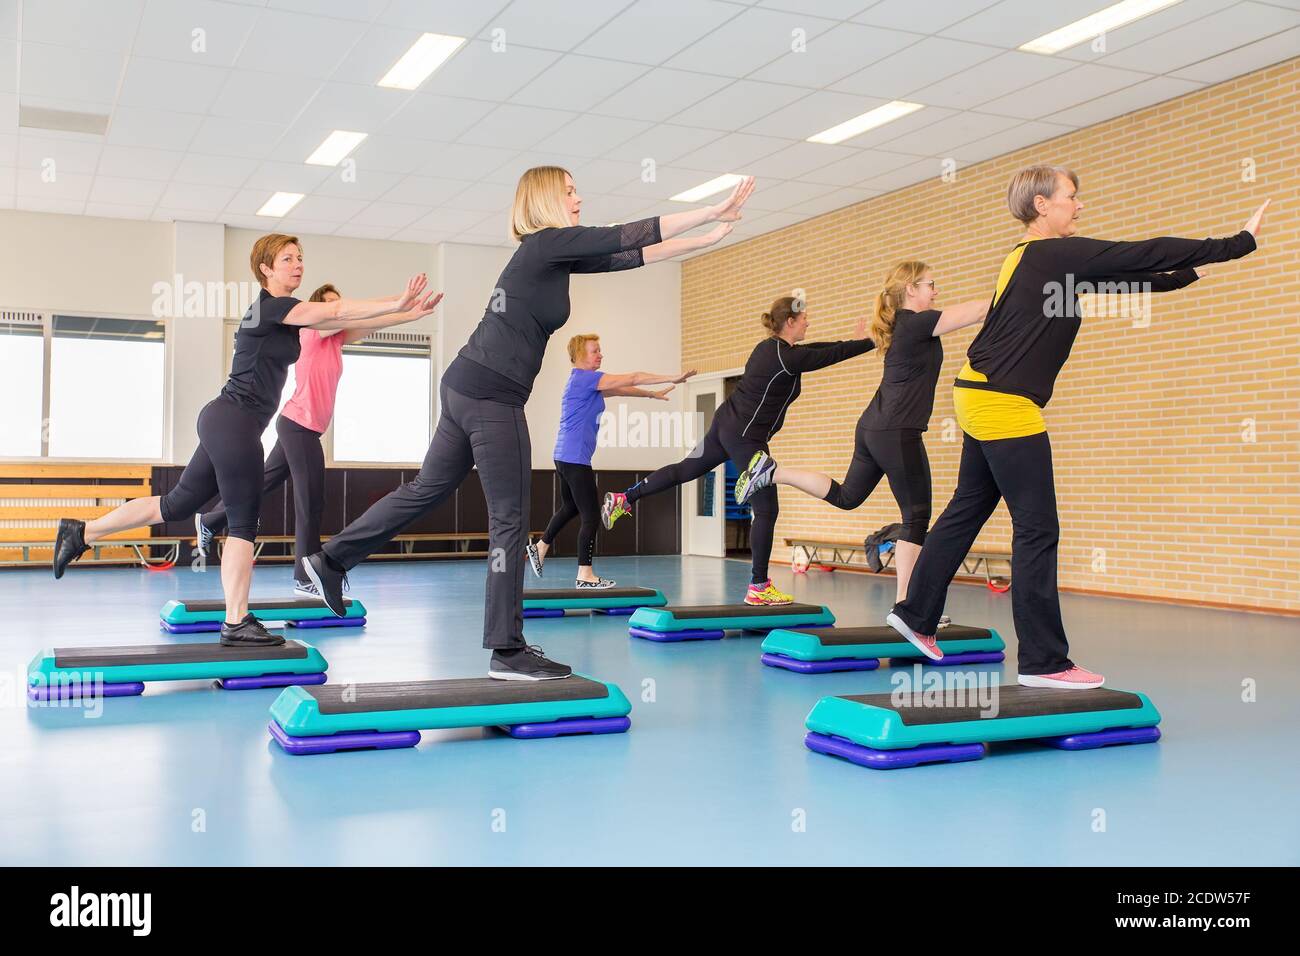 Caucasian dutch women group exercising in sports lessons Stock Photo